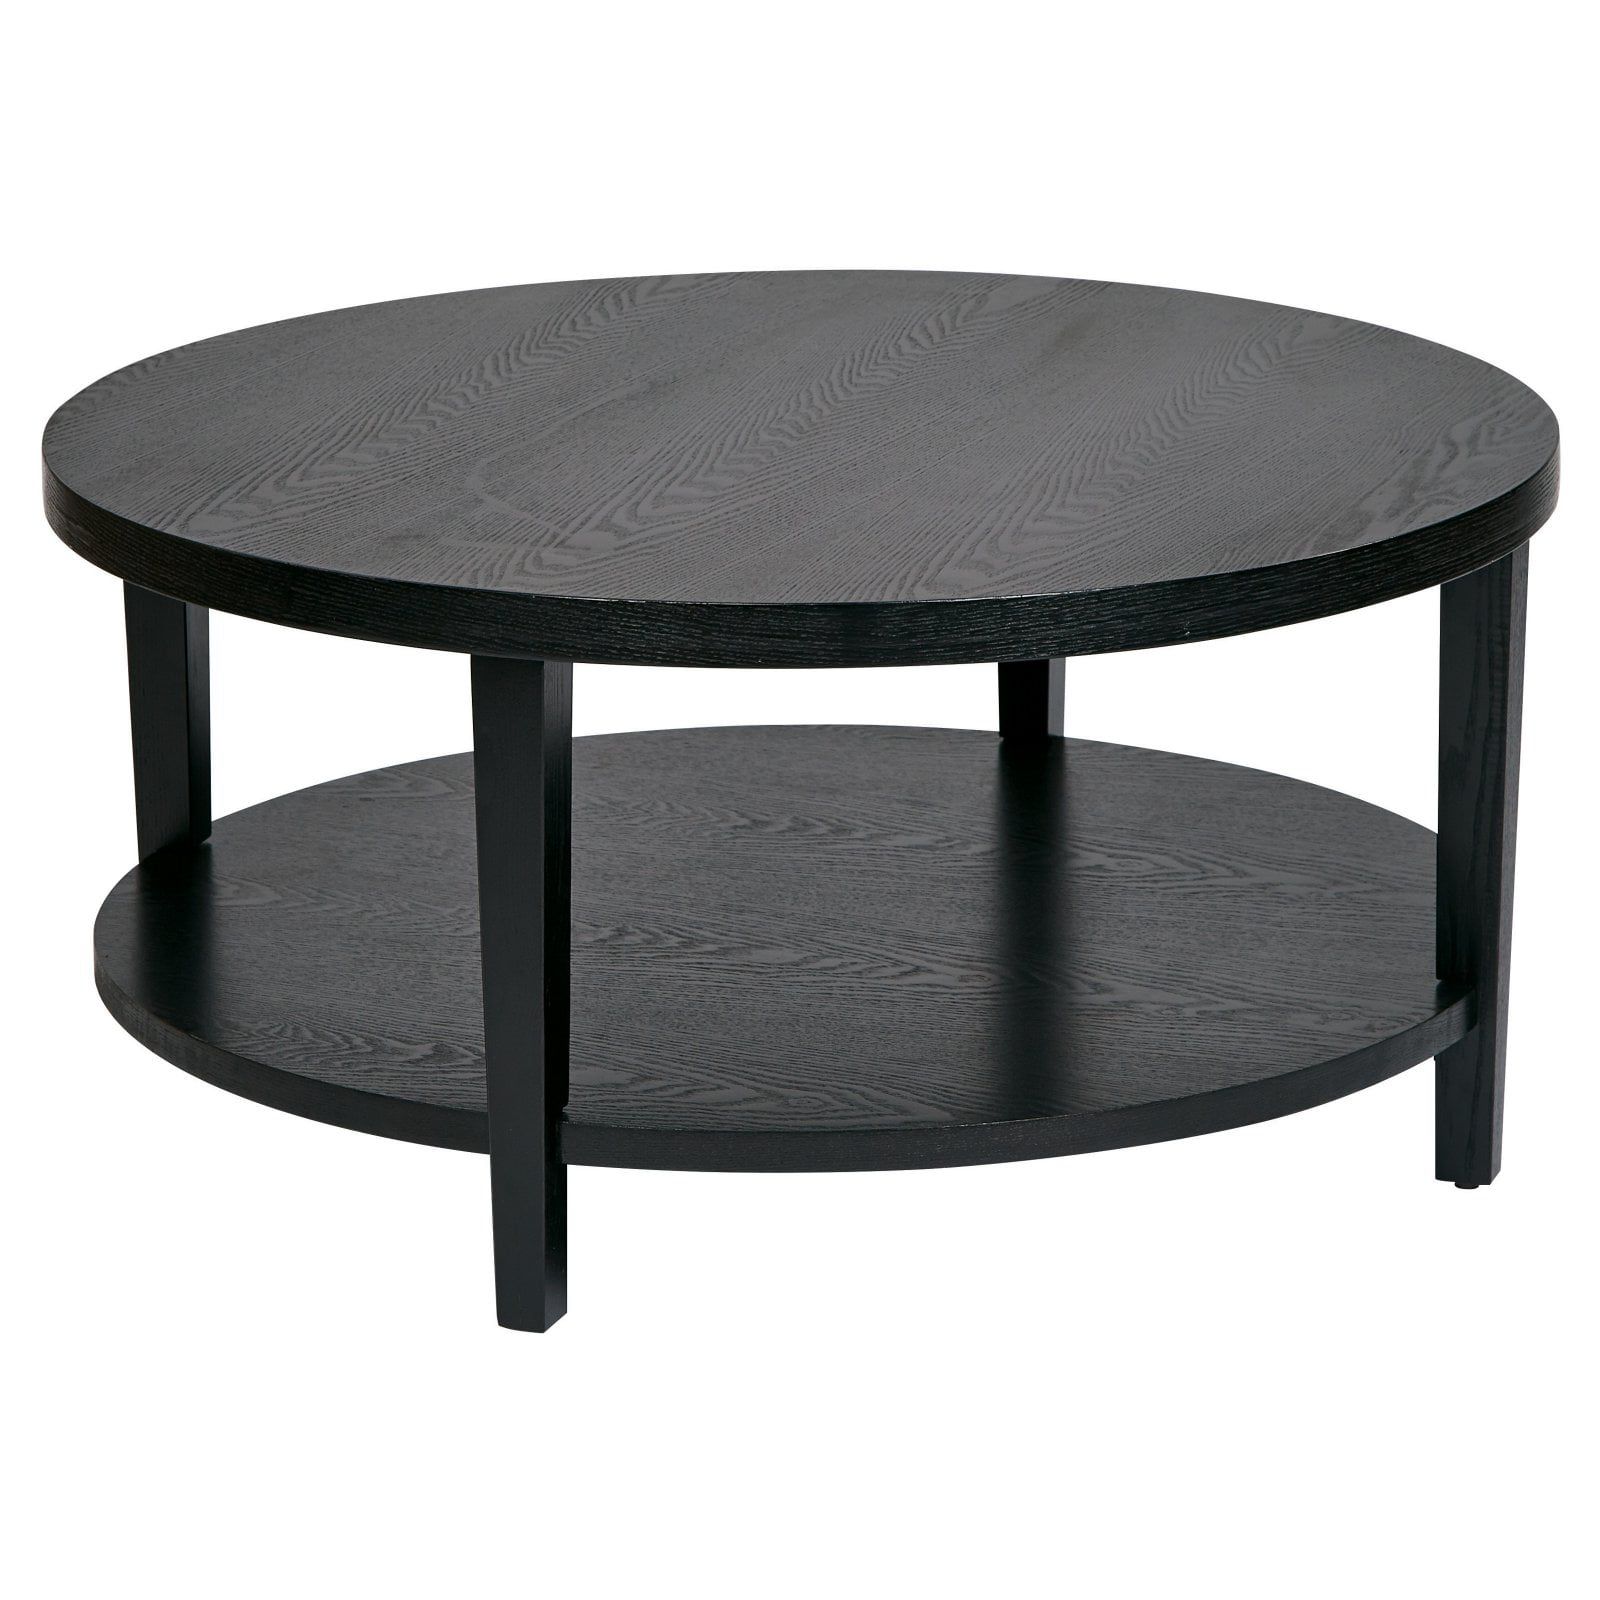 Osp Home Furnishings Work Smart Merge 36" Round Coffee Table (View 5 of 20)